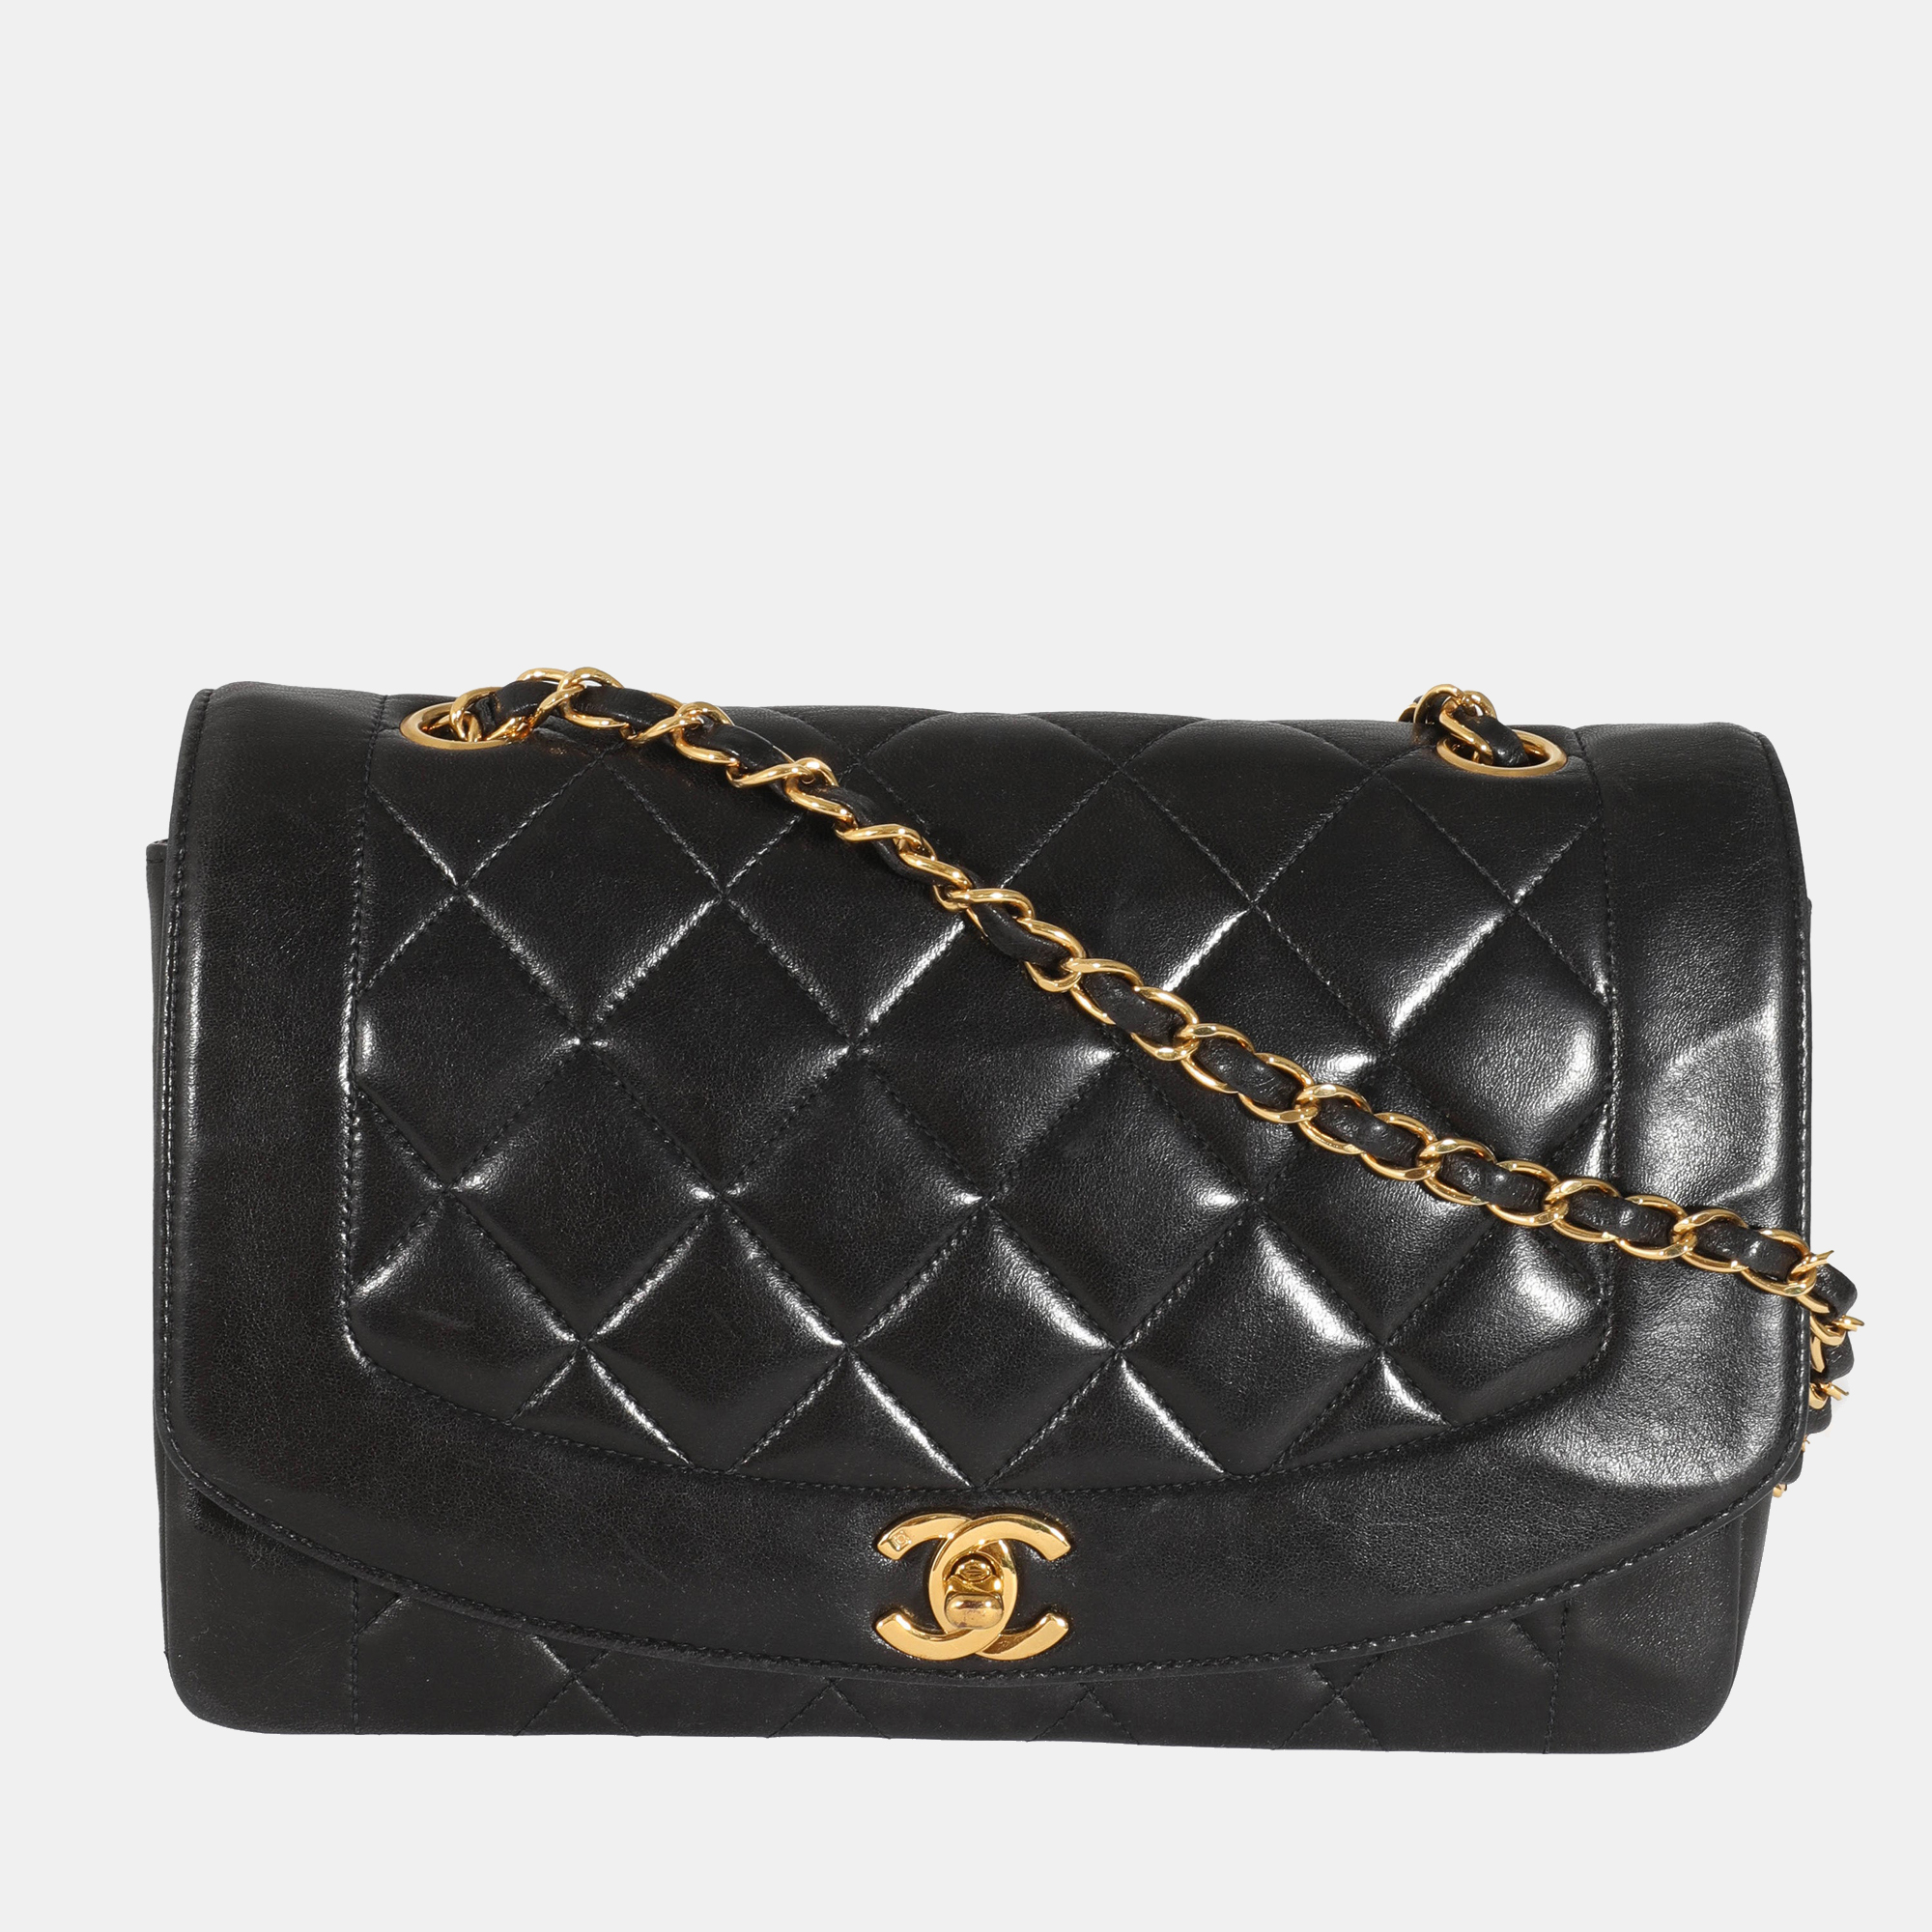 Chanel Vintage Black Quilted Lambskin Diana Flap Bag